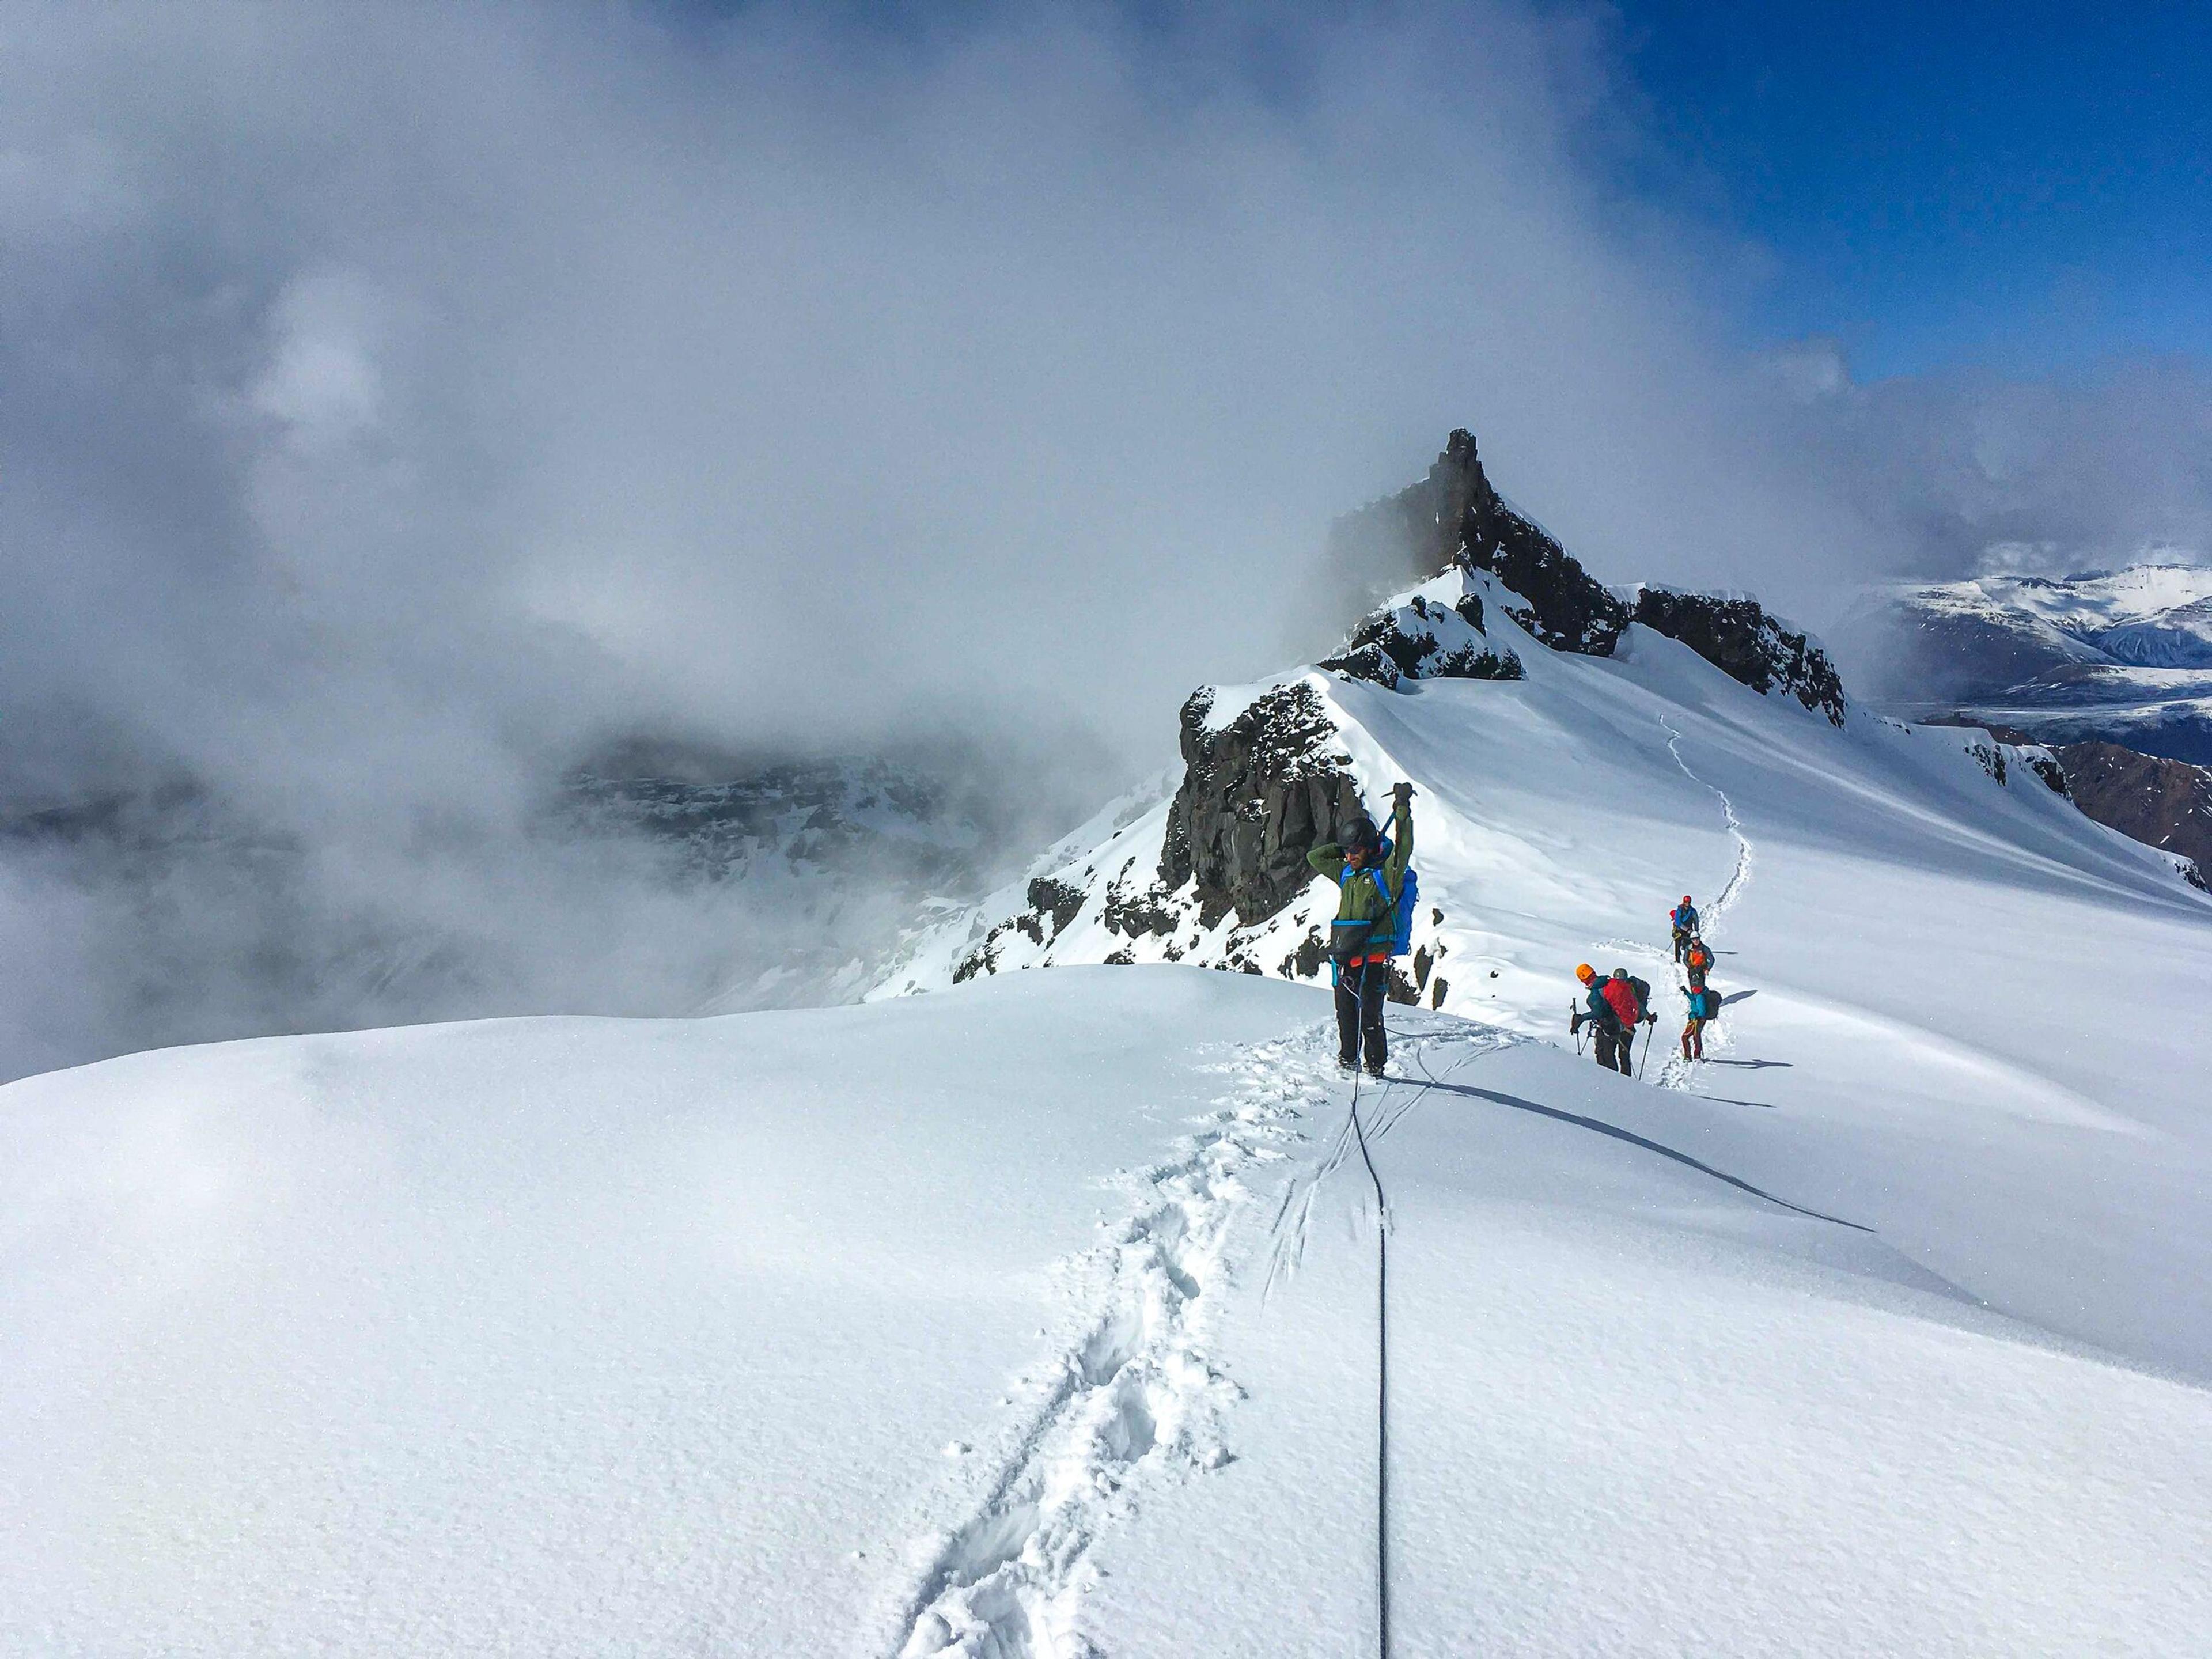 Mountaineers ascend a snow-covered ridge, roped together for safety, with a rocky peak piercing the clouds in the background.